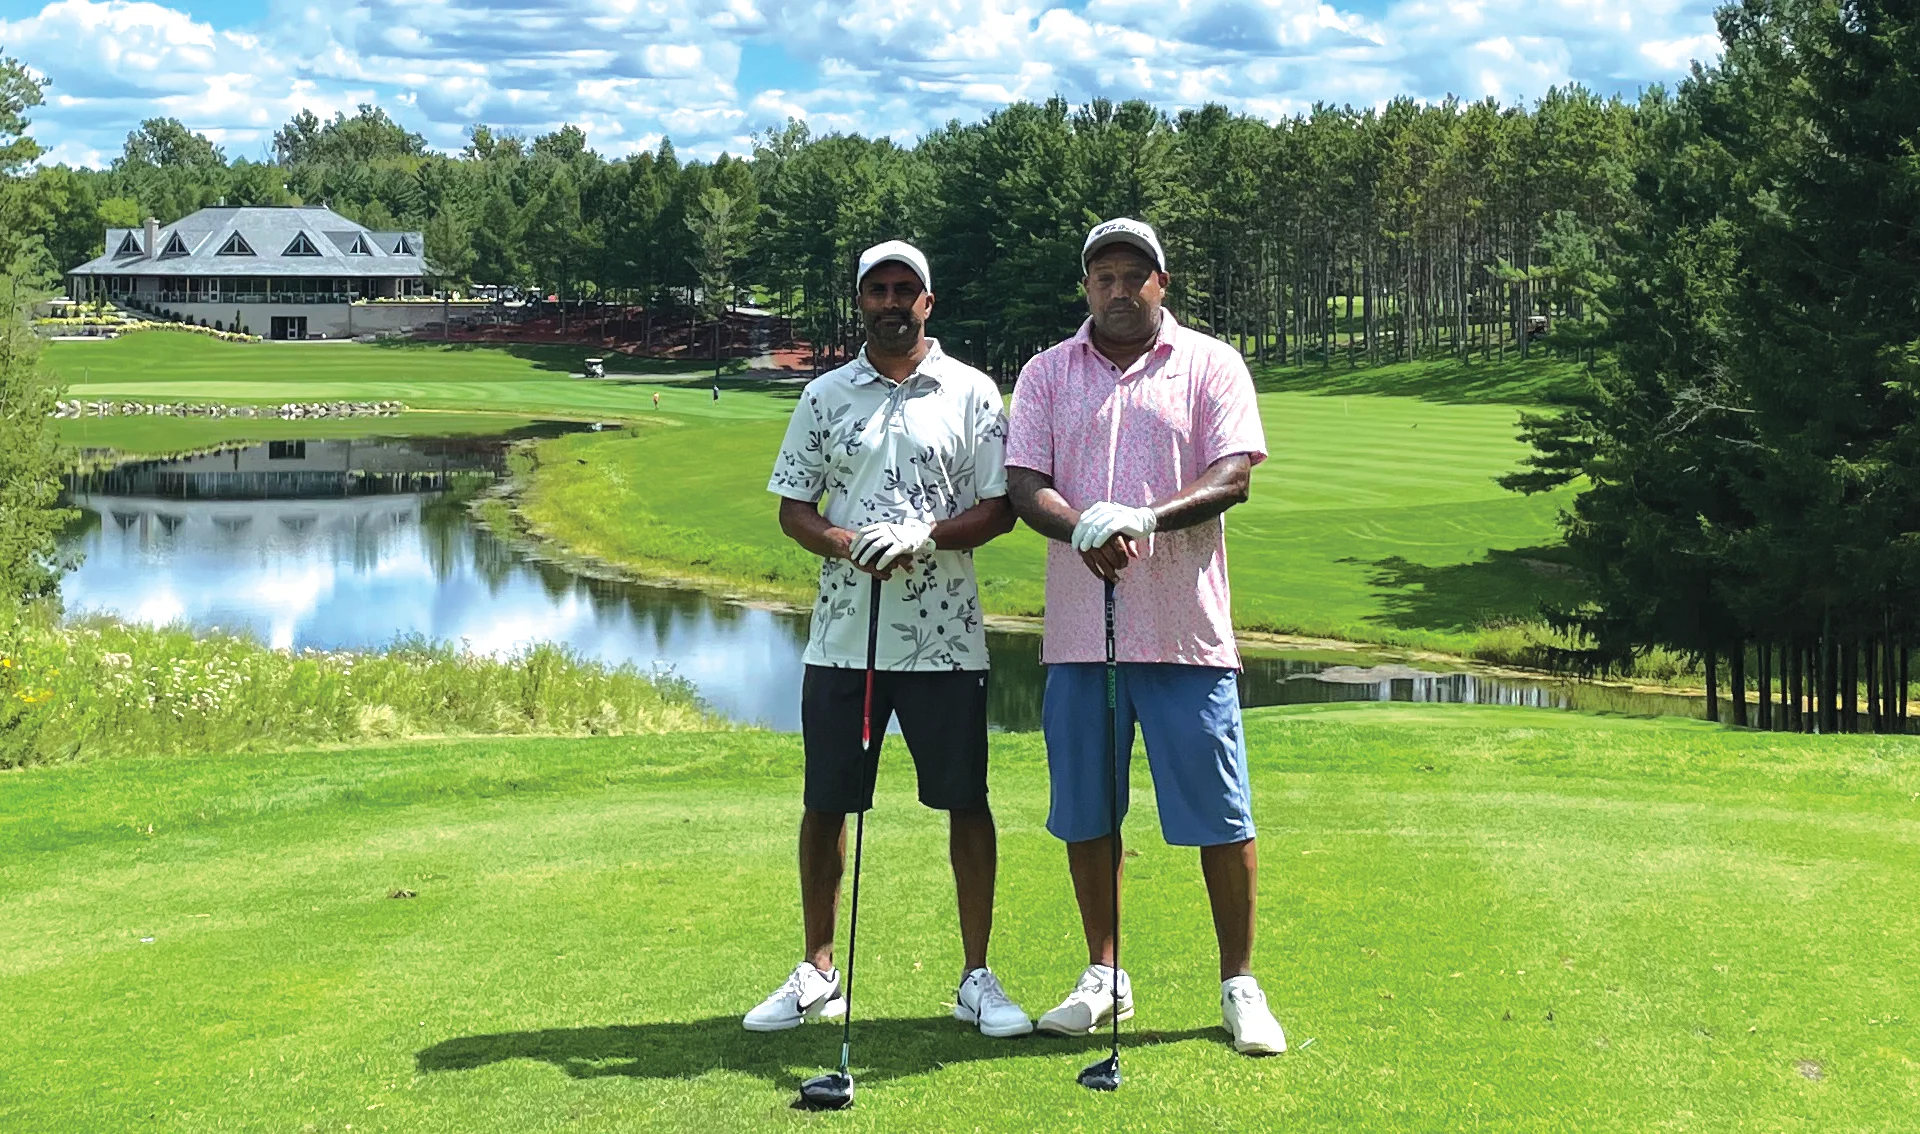 Kevin Lobo and his brother standing in an open golf field